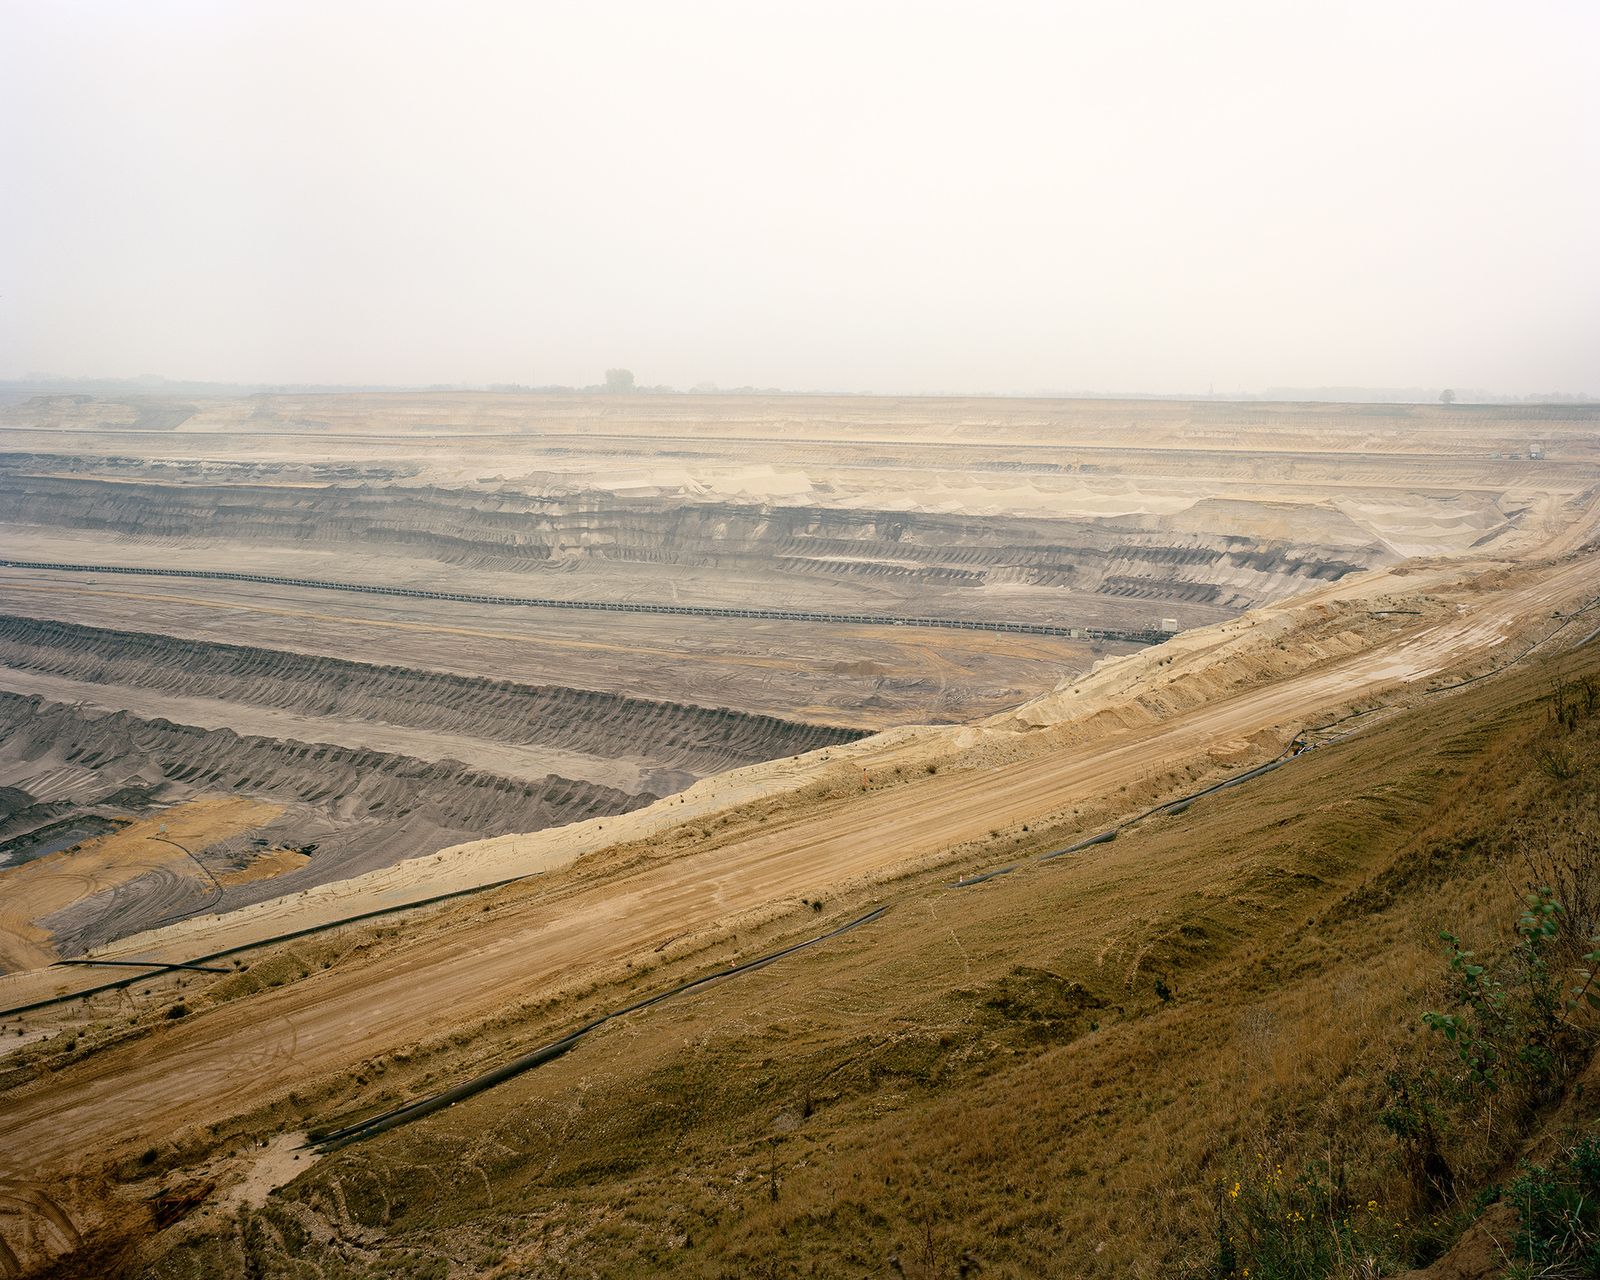 © Pietro Viti - The north-west corner of Garzweiler mining area. This big surface mine has an extension of 48 km², and still growing.